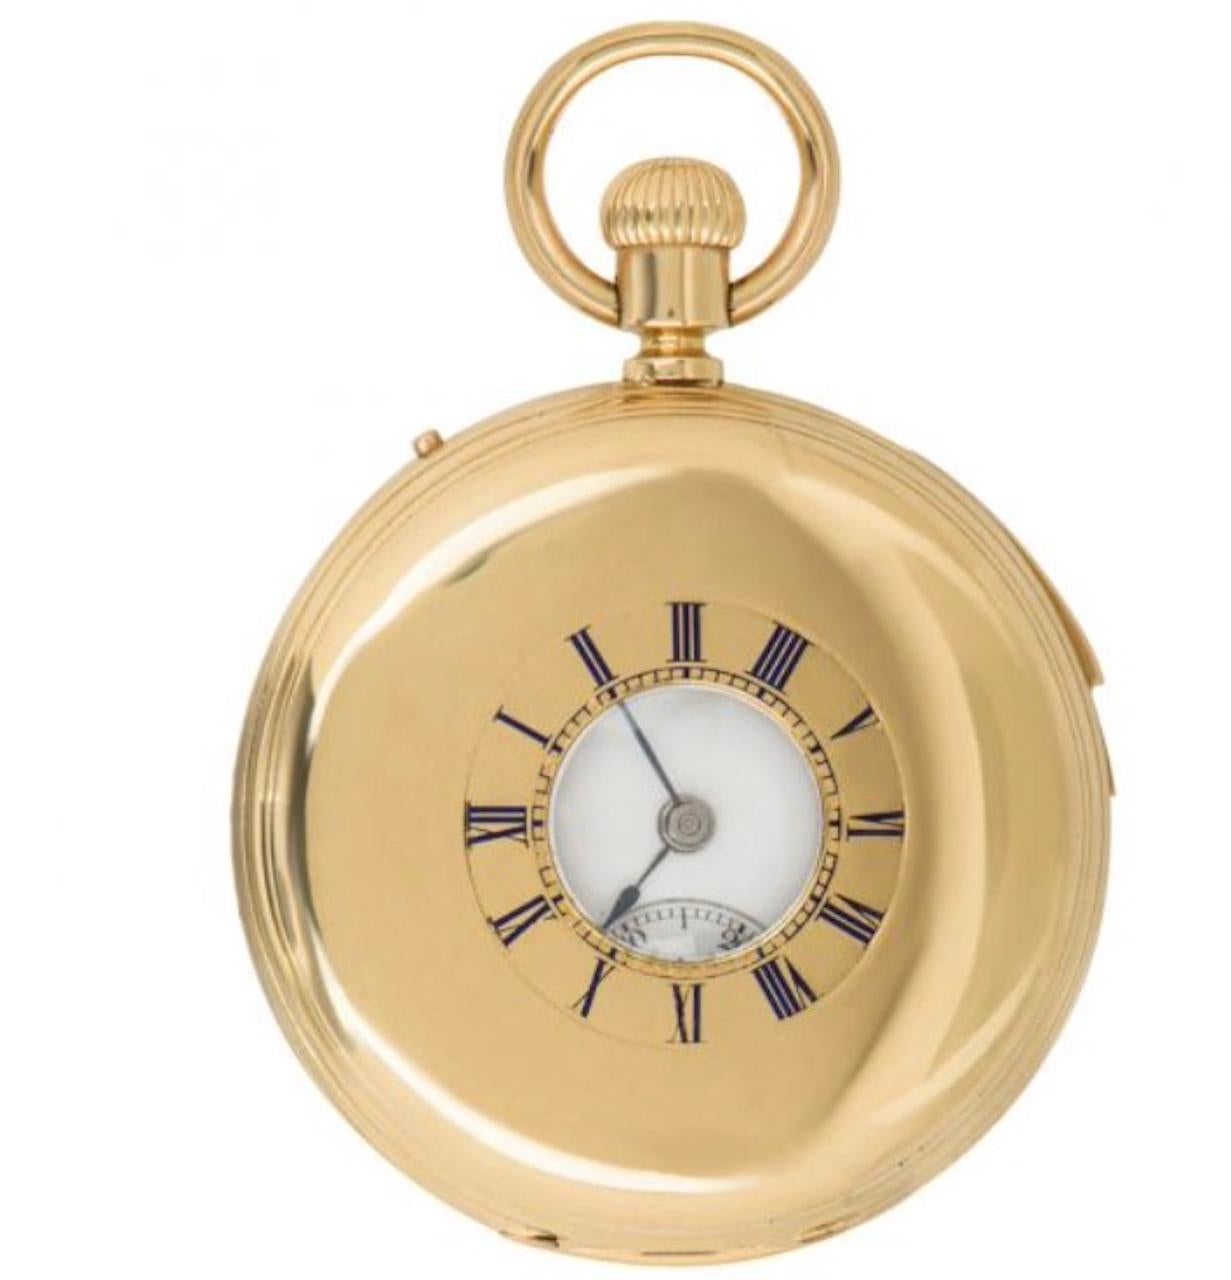 Charles Frodsham. A rare 18ct Gold Half Hunter Keyless Lever Minute Repeater Pocket Watch C1900s.

Dial: The excellent white enamel dial with Roman Numerals and outer minute track. The dial signed Chas Frodsham and with the subsidiary seconds dial